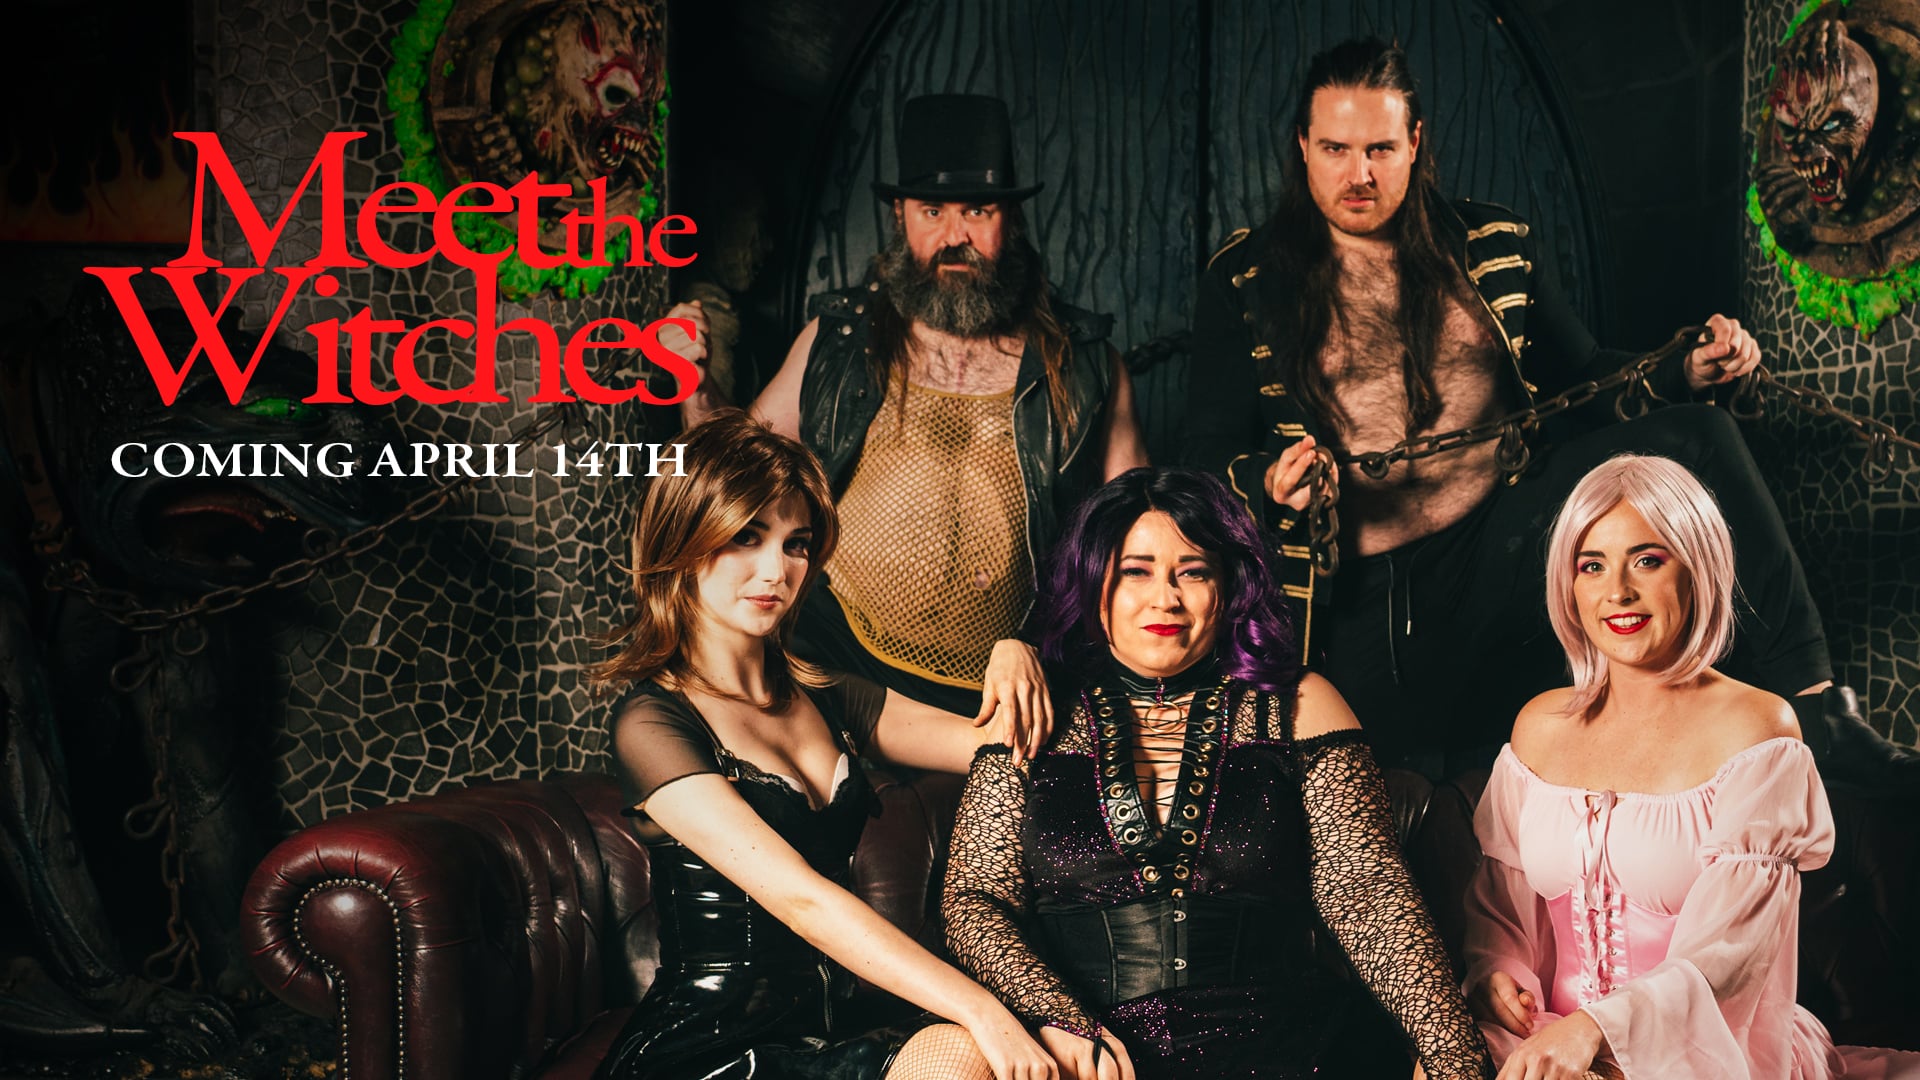 Meet The Witches – Opening Friday 14th April